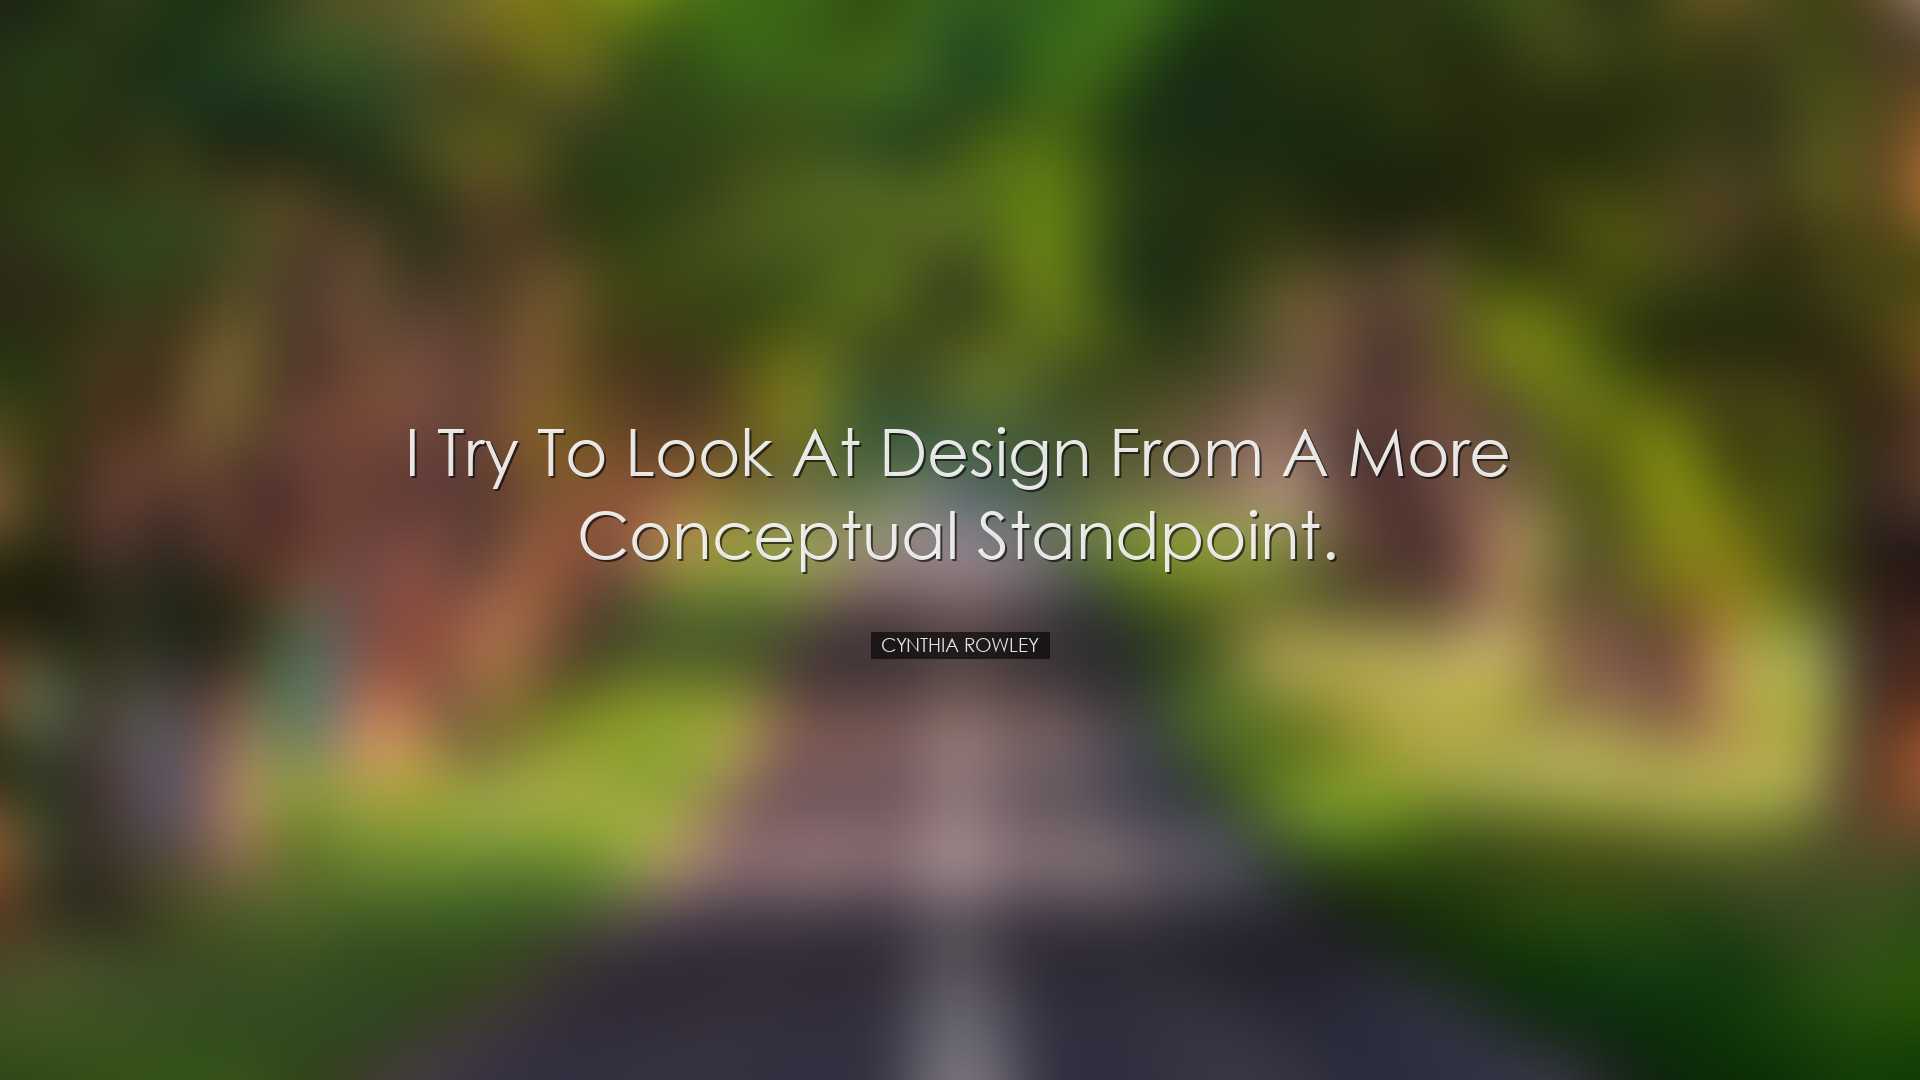 I try to look at design from a more conceptual standpoint. - Cynth